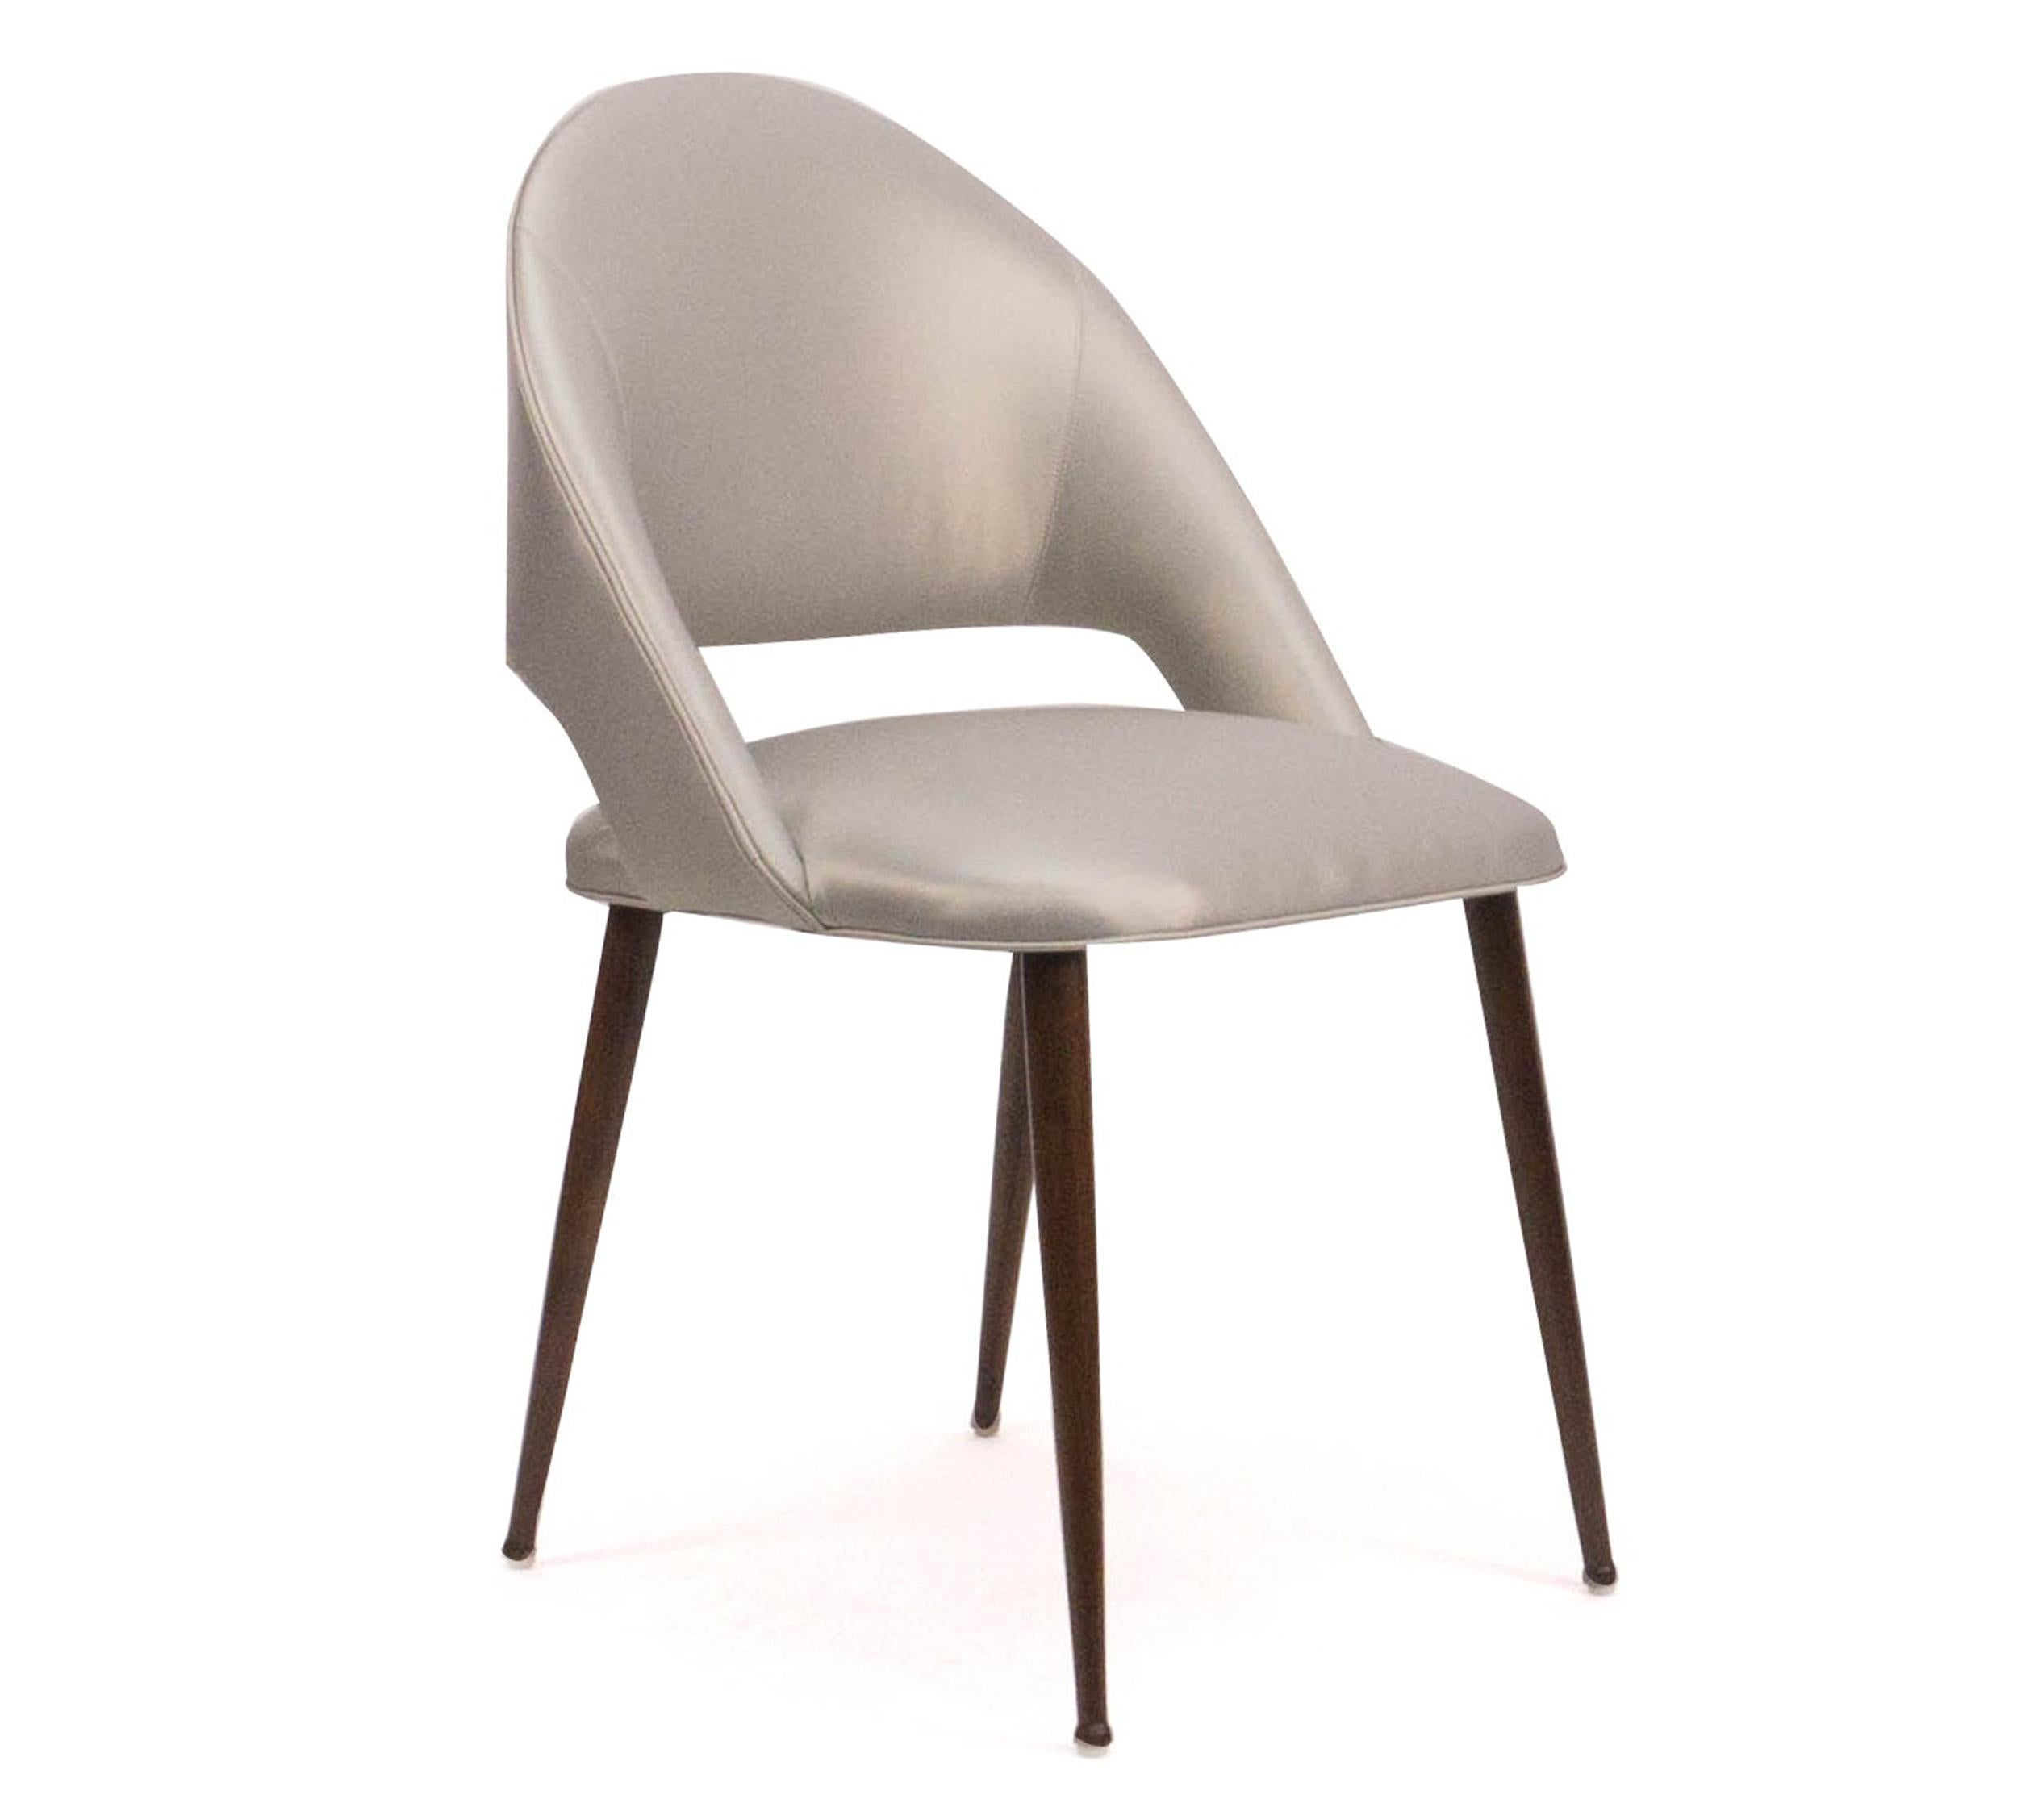 Contemporary Art Deco Style Dining Chair with Round Legs and Vinyl Upholstery 'Customizable' For Sale